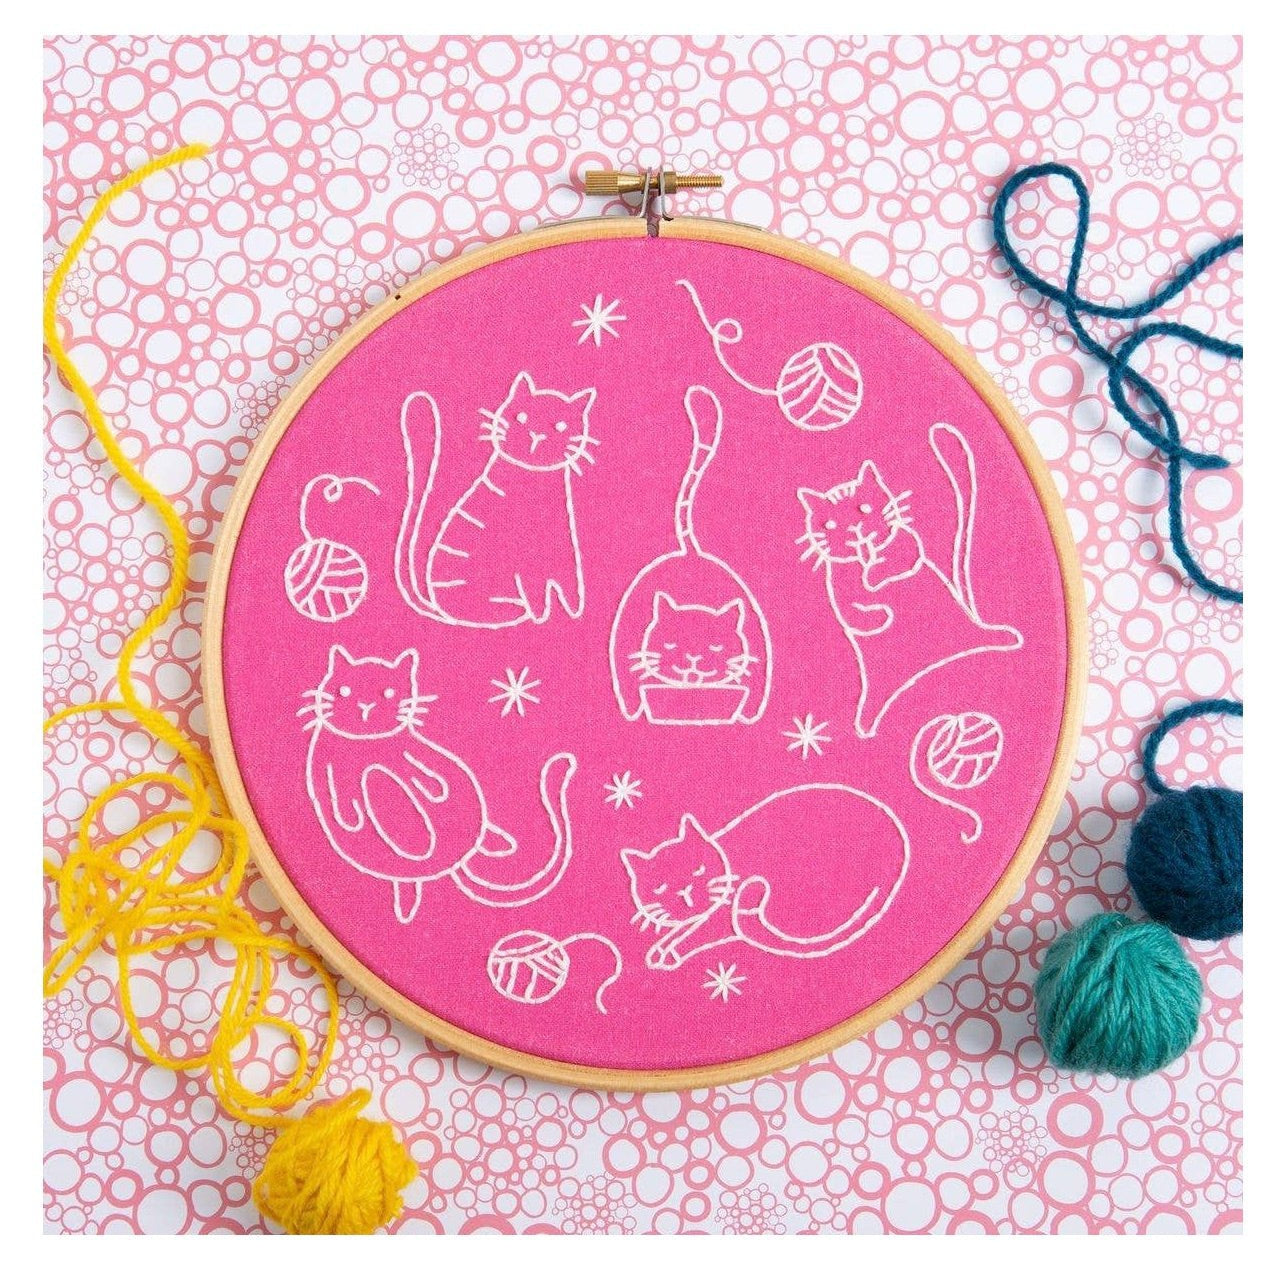 Crafty Cats Embroidery Kit | Made in the UK